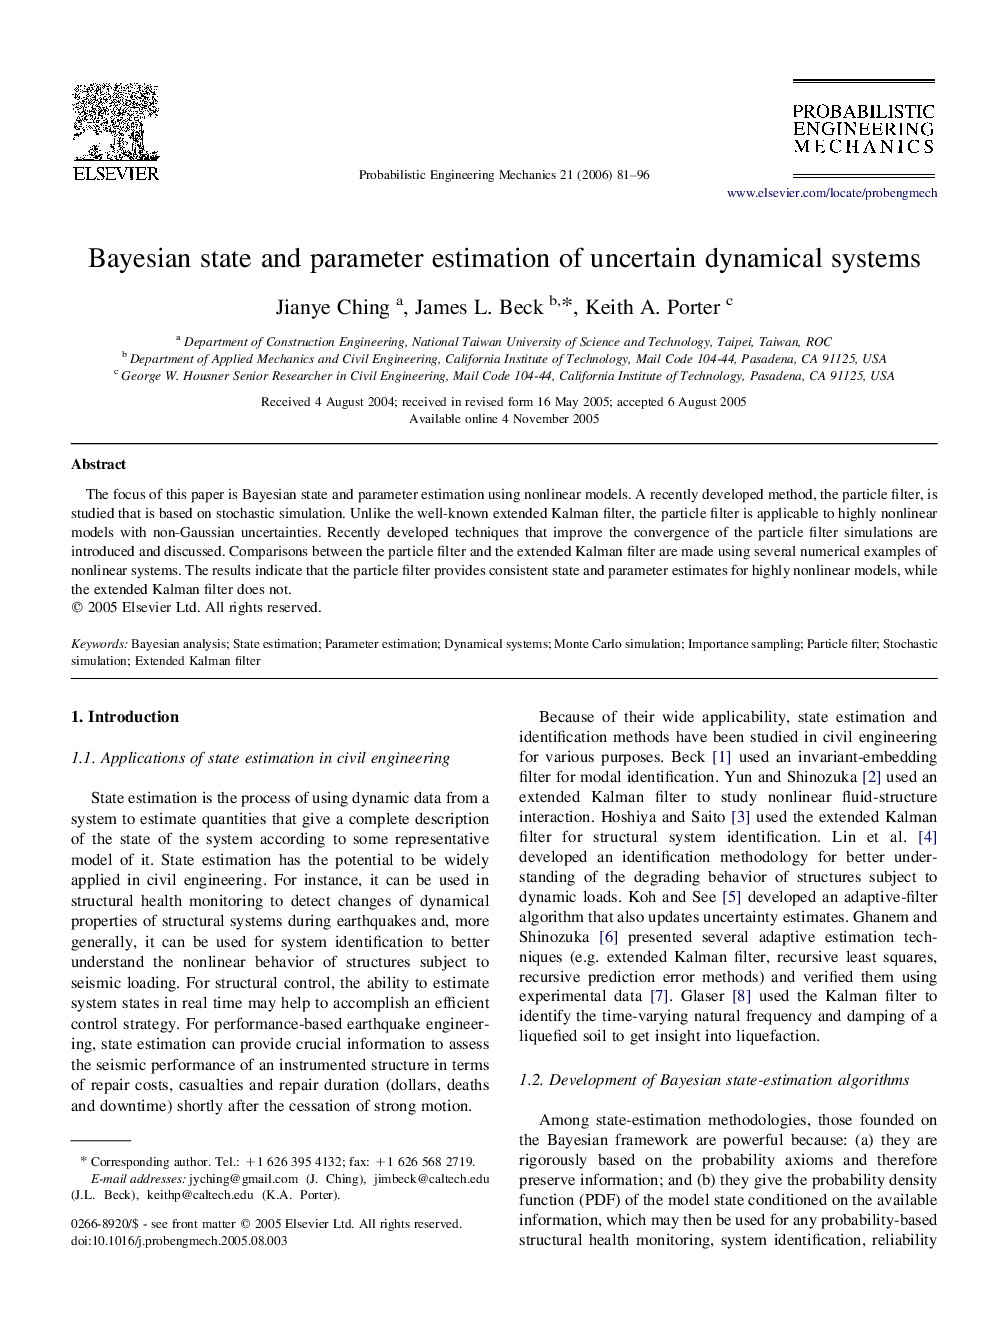 Bayesian state and parameter estimation of uncertain dynamical systems